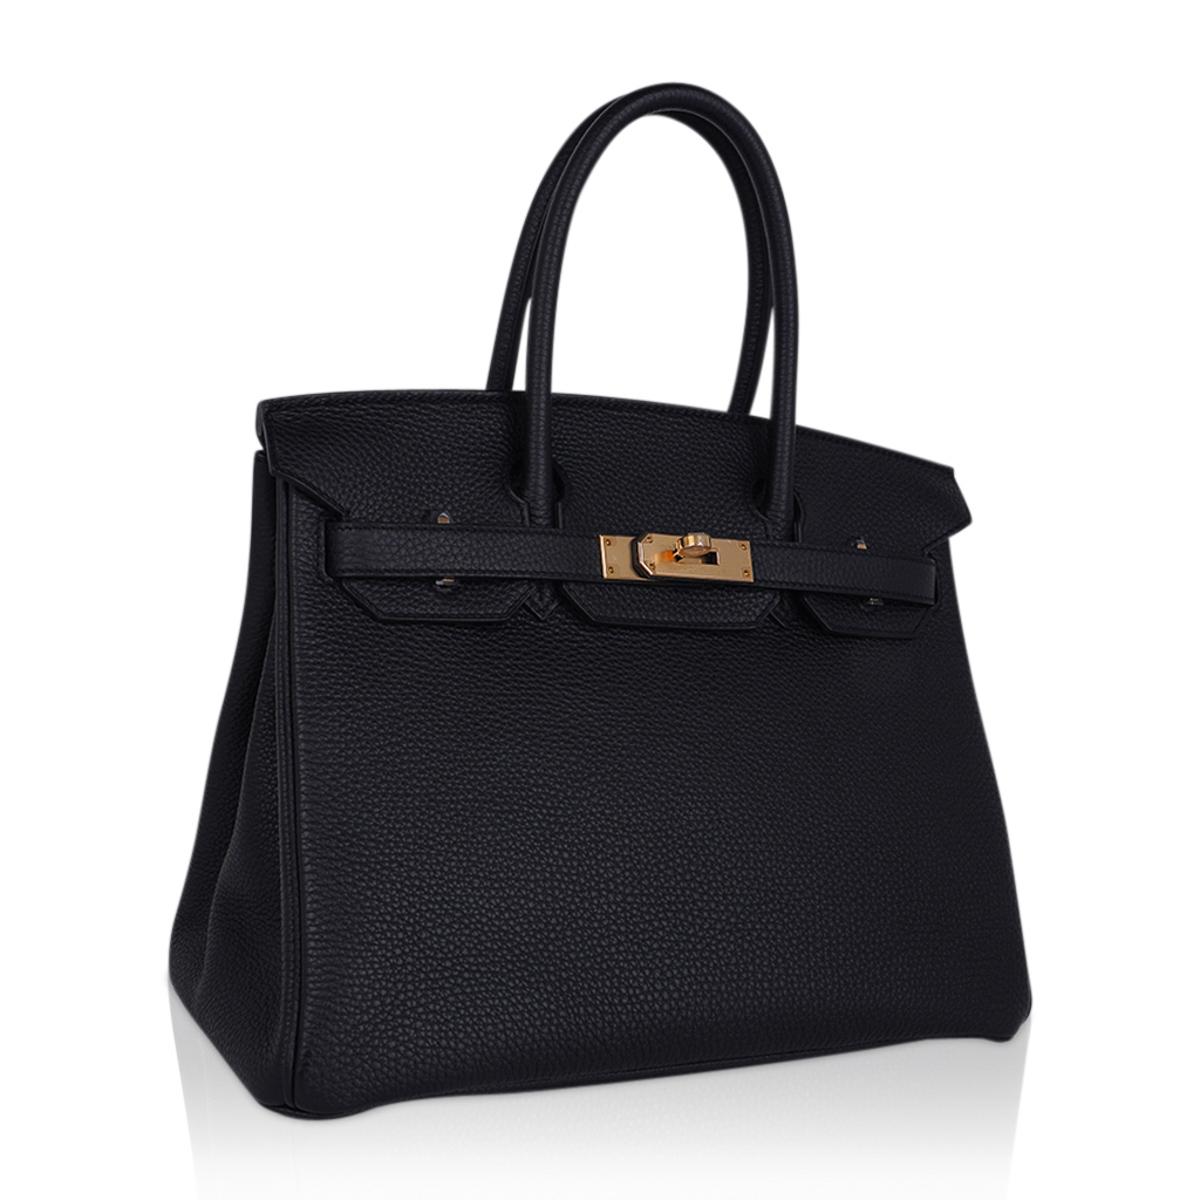 Mightychic offers an  Hermes Birkin 30 bag featured in Black Togo leather.
Rich with rose gold hardware.
Comes with lock and keys and clochette, sleepers, raincoat and signature orange Hermes box.
For 22 years Mightychic has offered superb customer